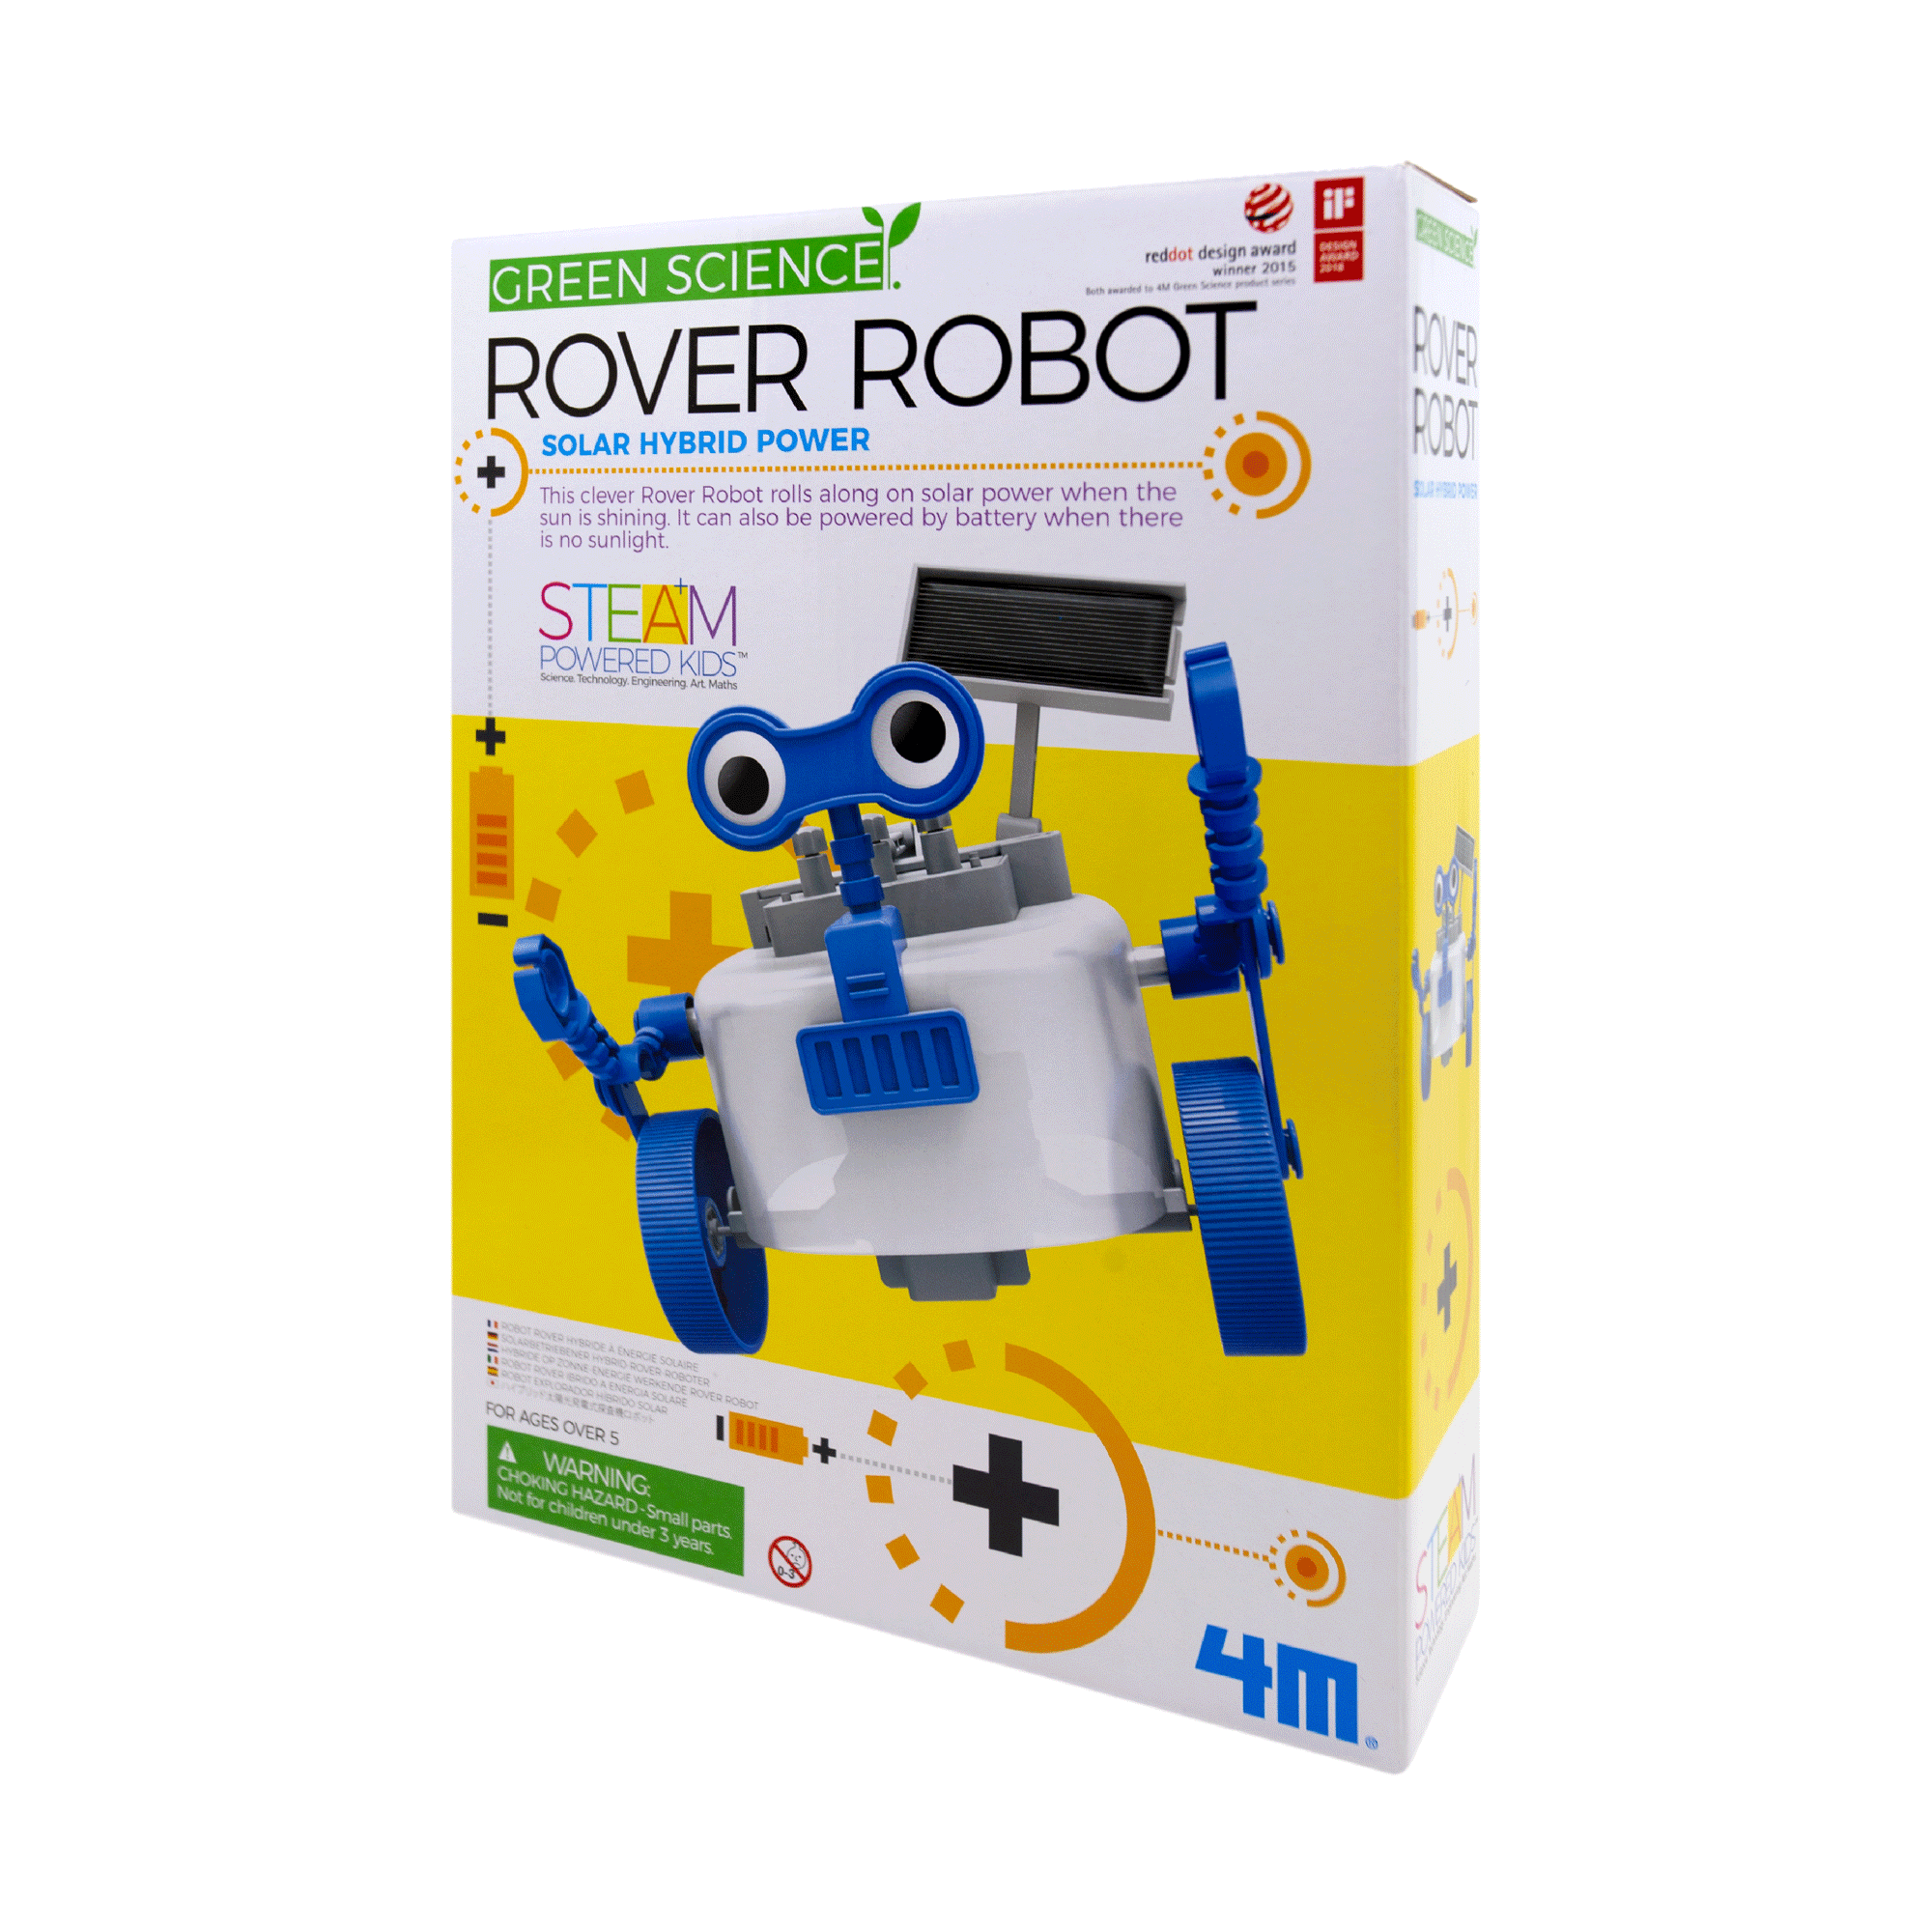 4M GREEN SCIENCE ROVER ROBOT